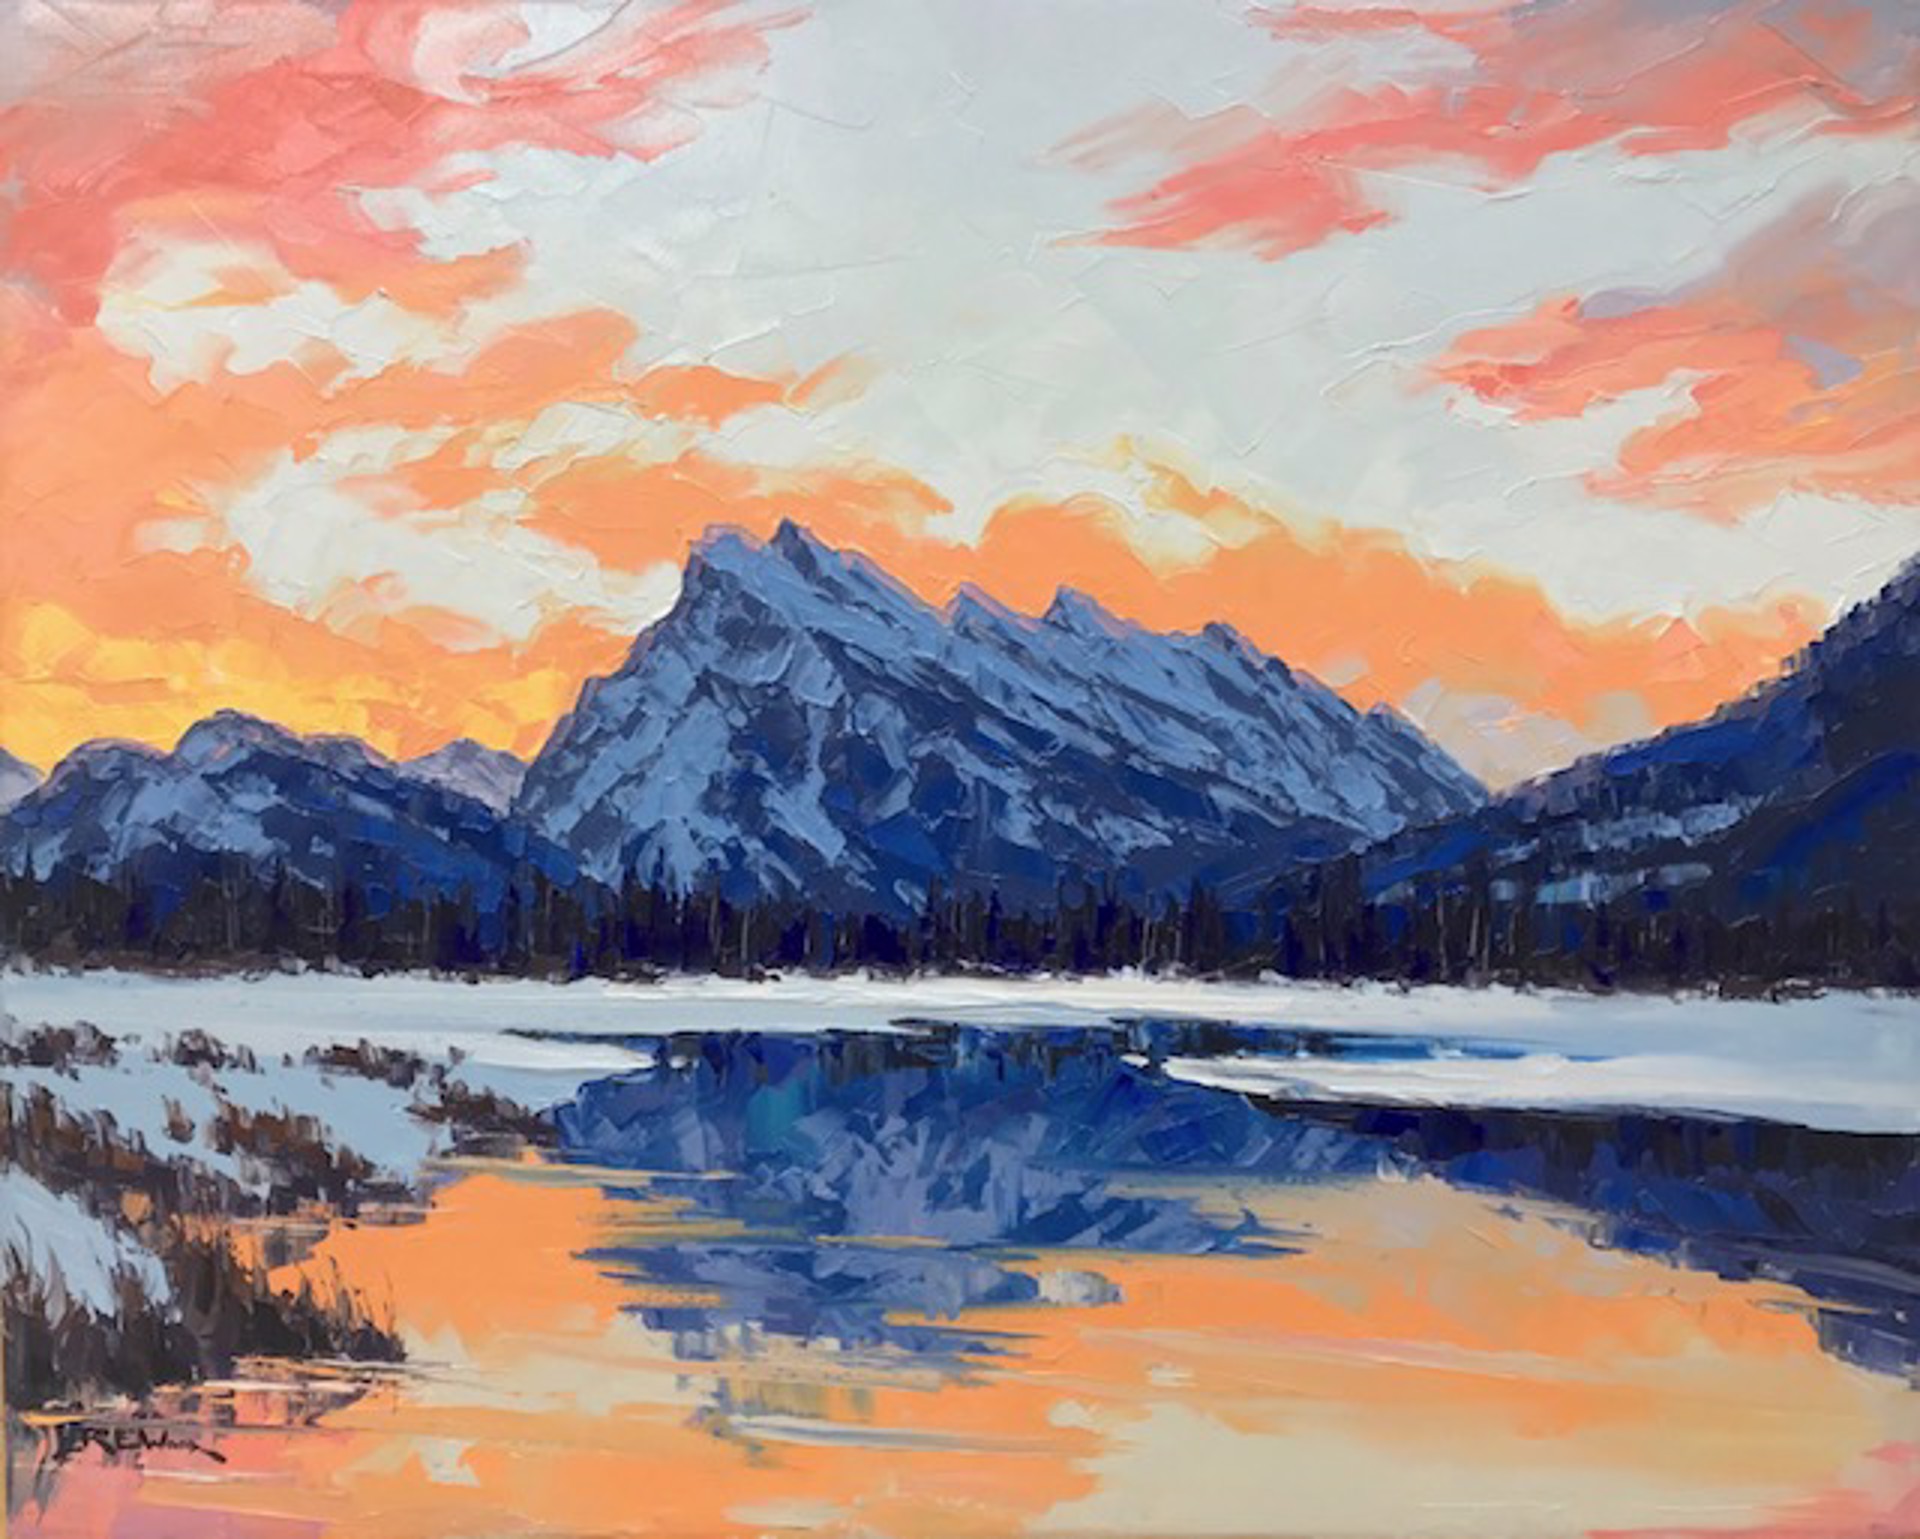 Mount Rundle Dawn by Robert E Wood